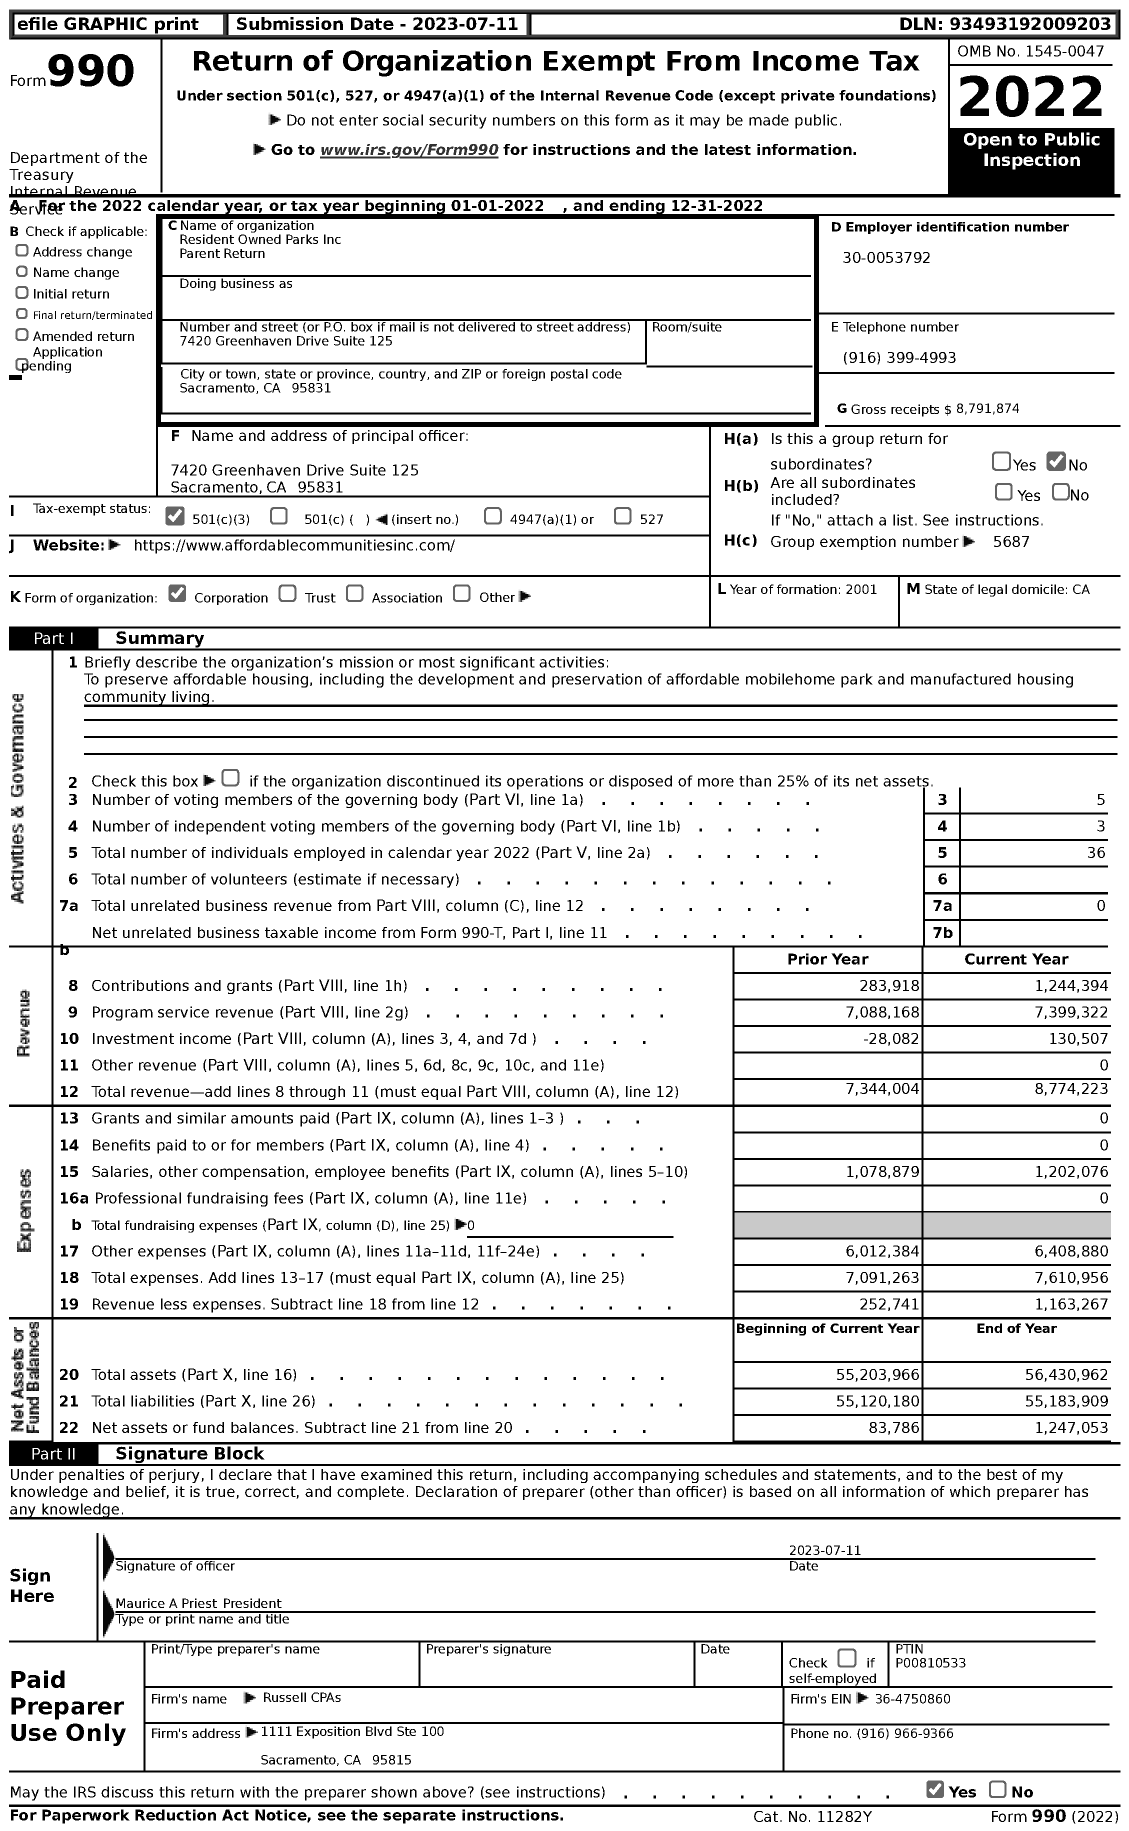 Image of first page of 2022 Form 990 for Resident Owned Parks Inc Parent Return (ROP)